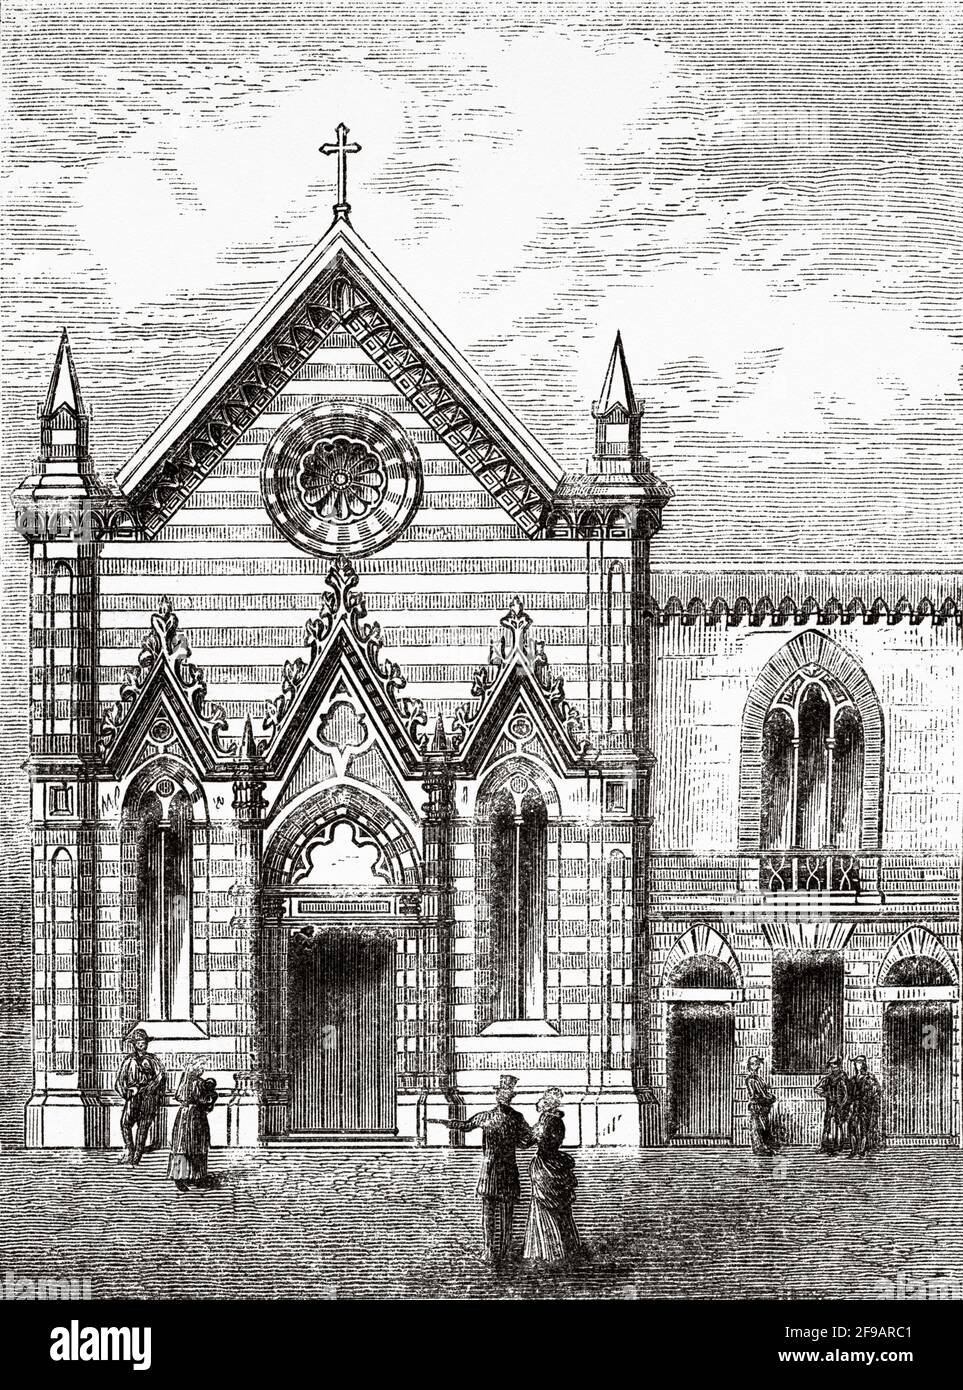 First Protestant Church erected in Rome, late 1800s. Italy, Europe. Old 19th century engraved illustration from Souvenirs de la Reformation en Italie 1883 by John Stoughton (1807-1897) Stock Photo